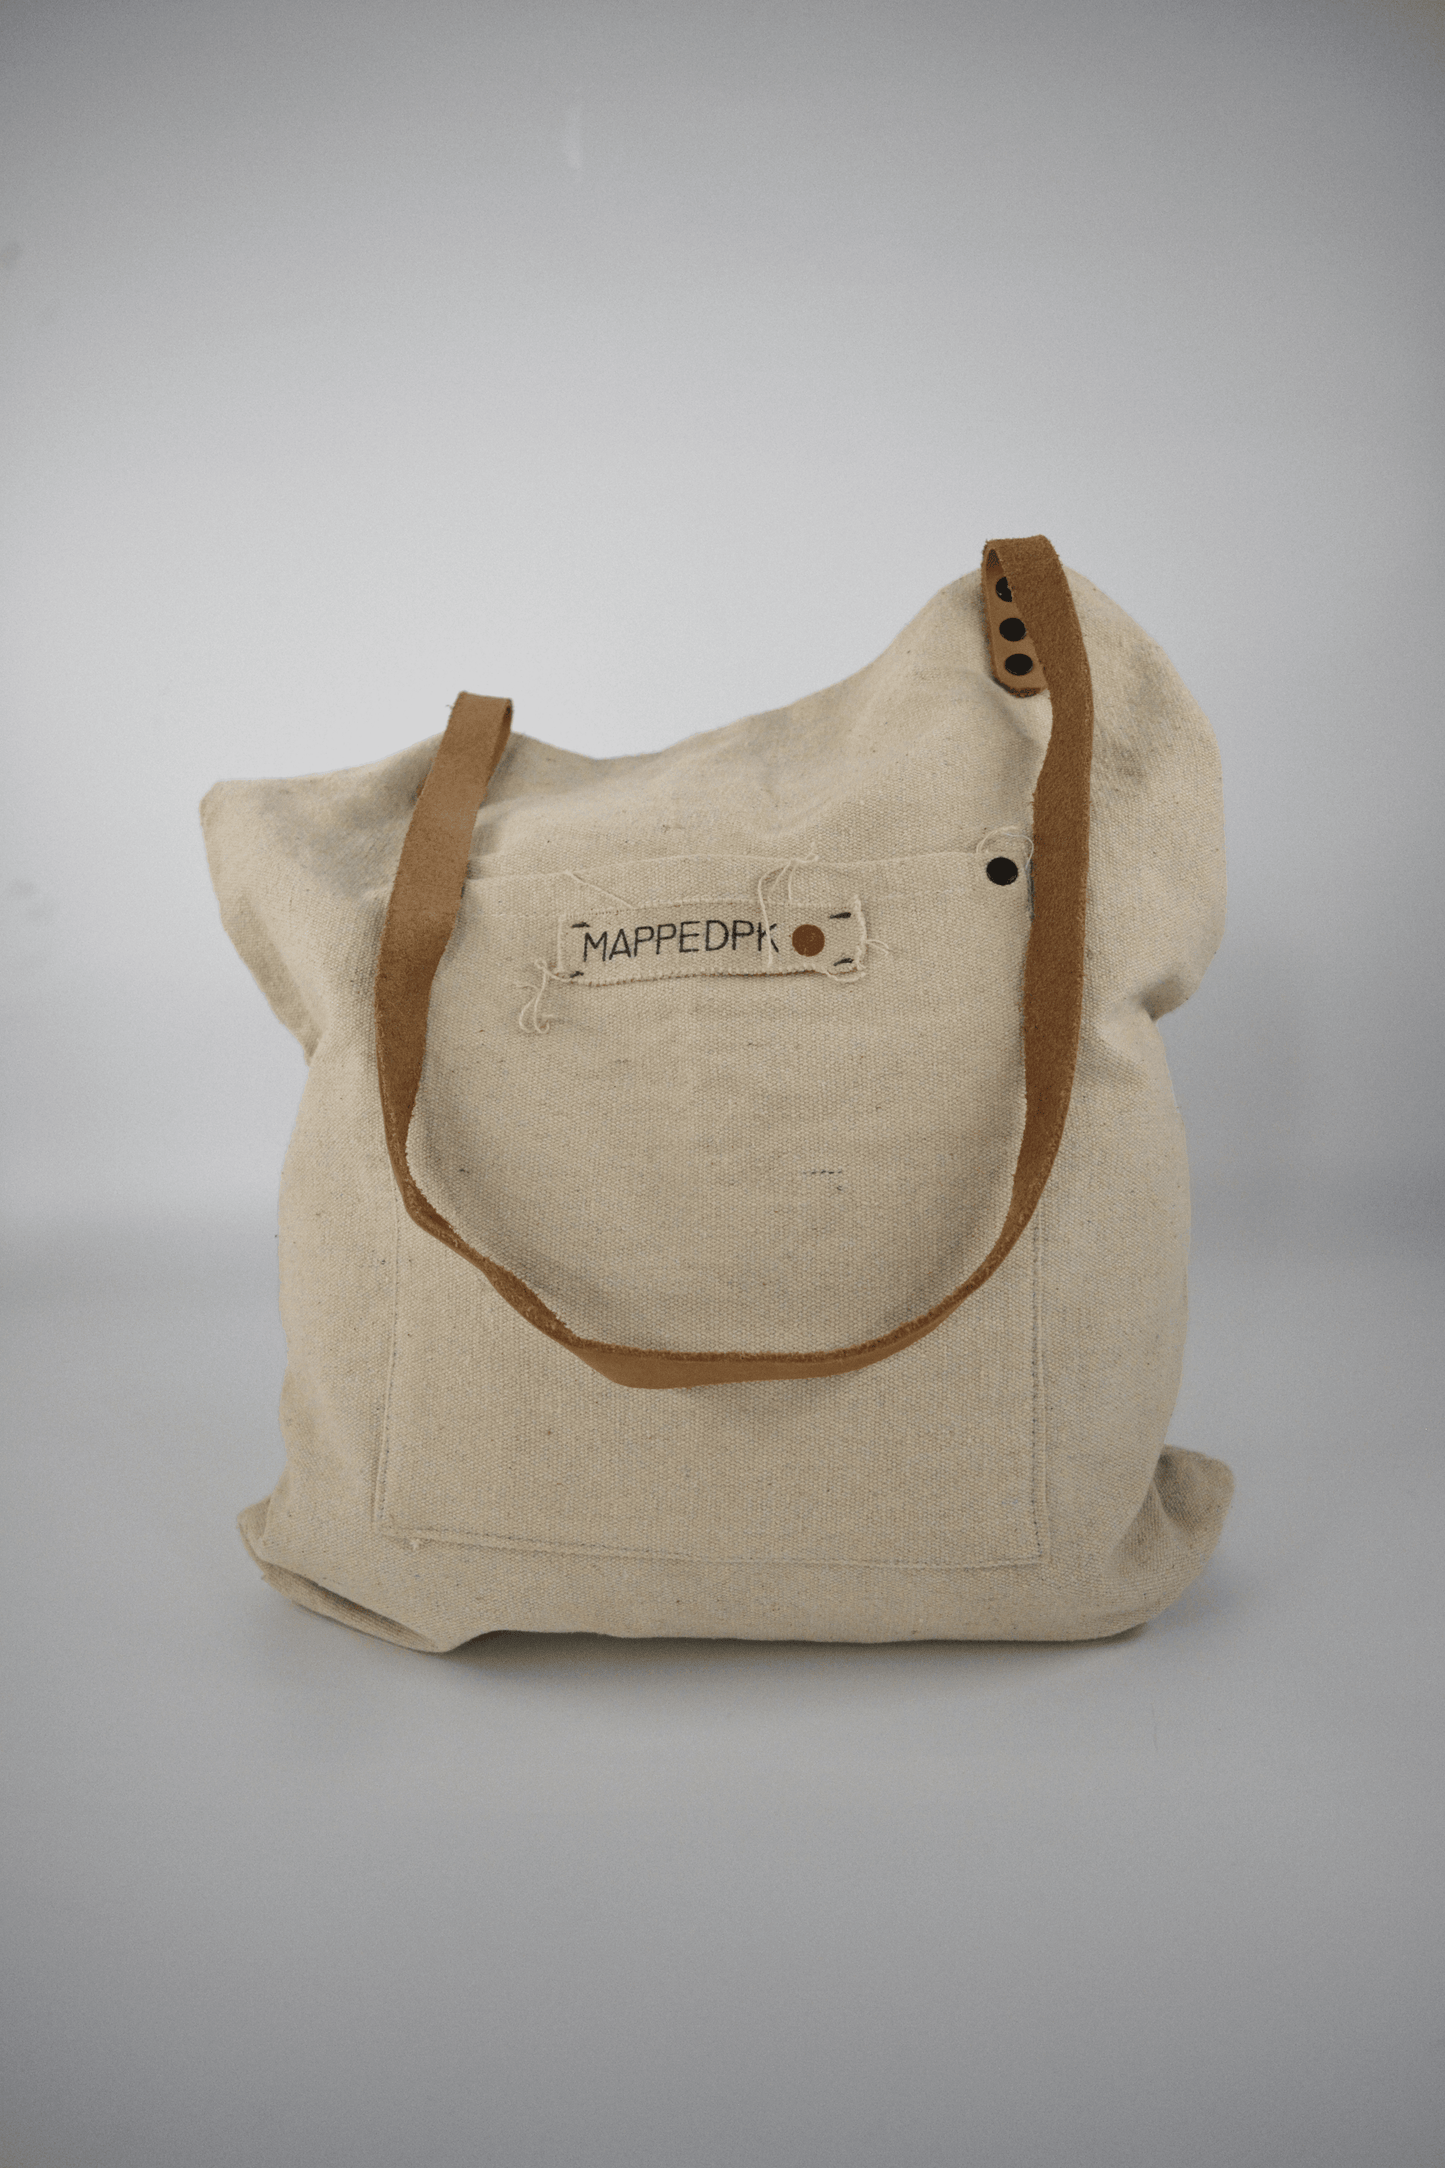 Lahore - Mapped Tote Bag